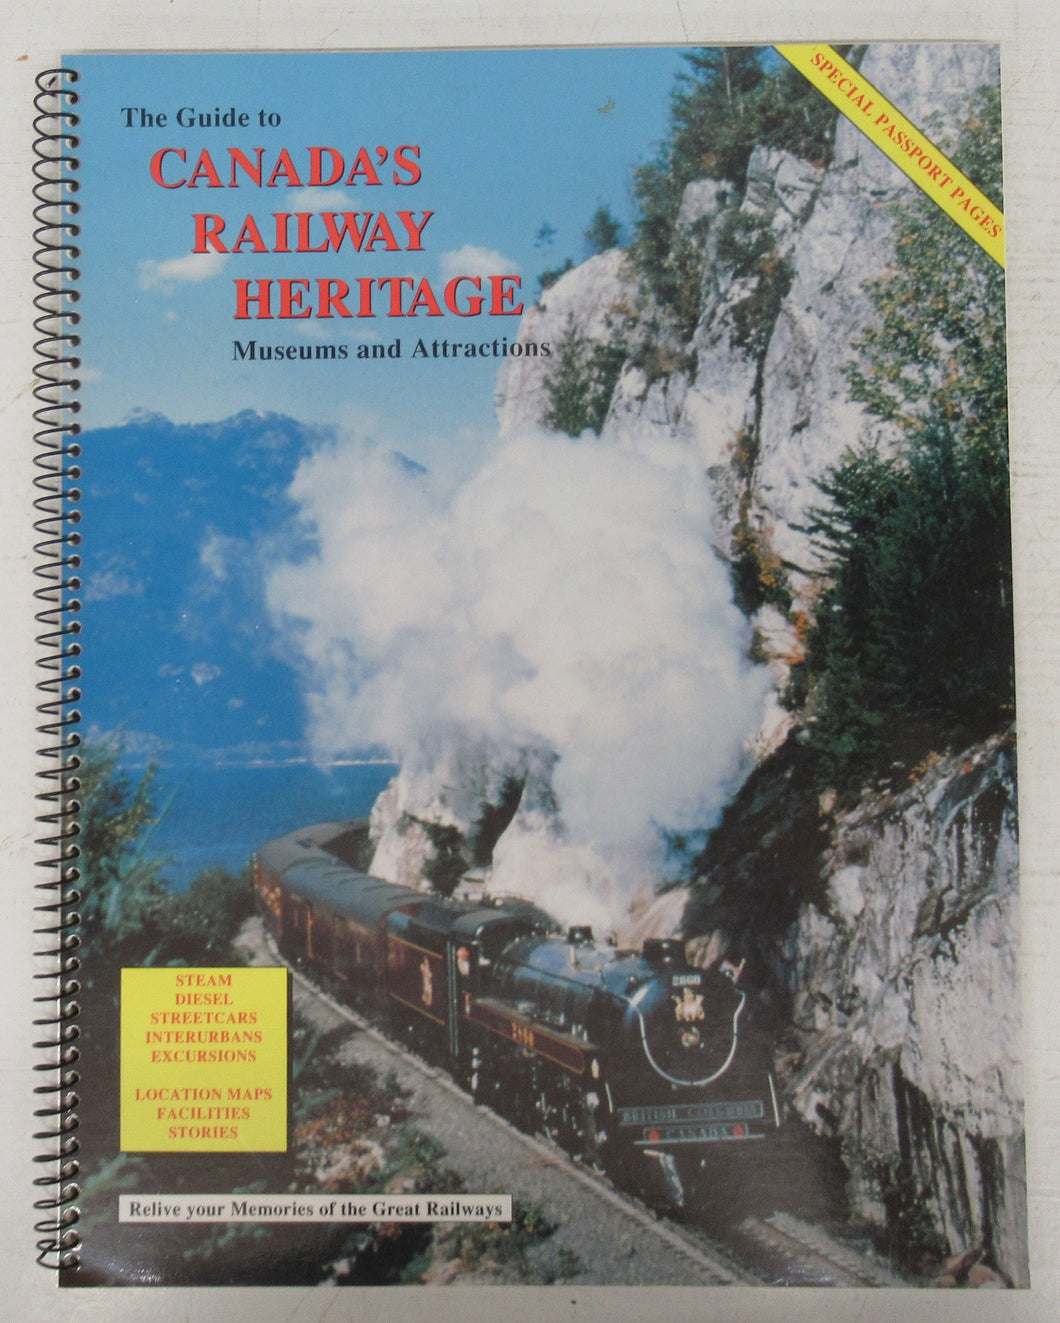 The Guide to Canada's Railway Heritage: Museums and Attractions